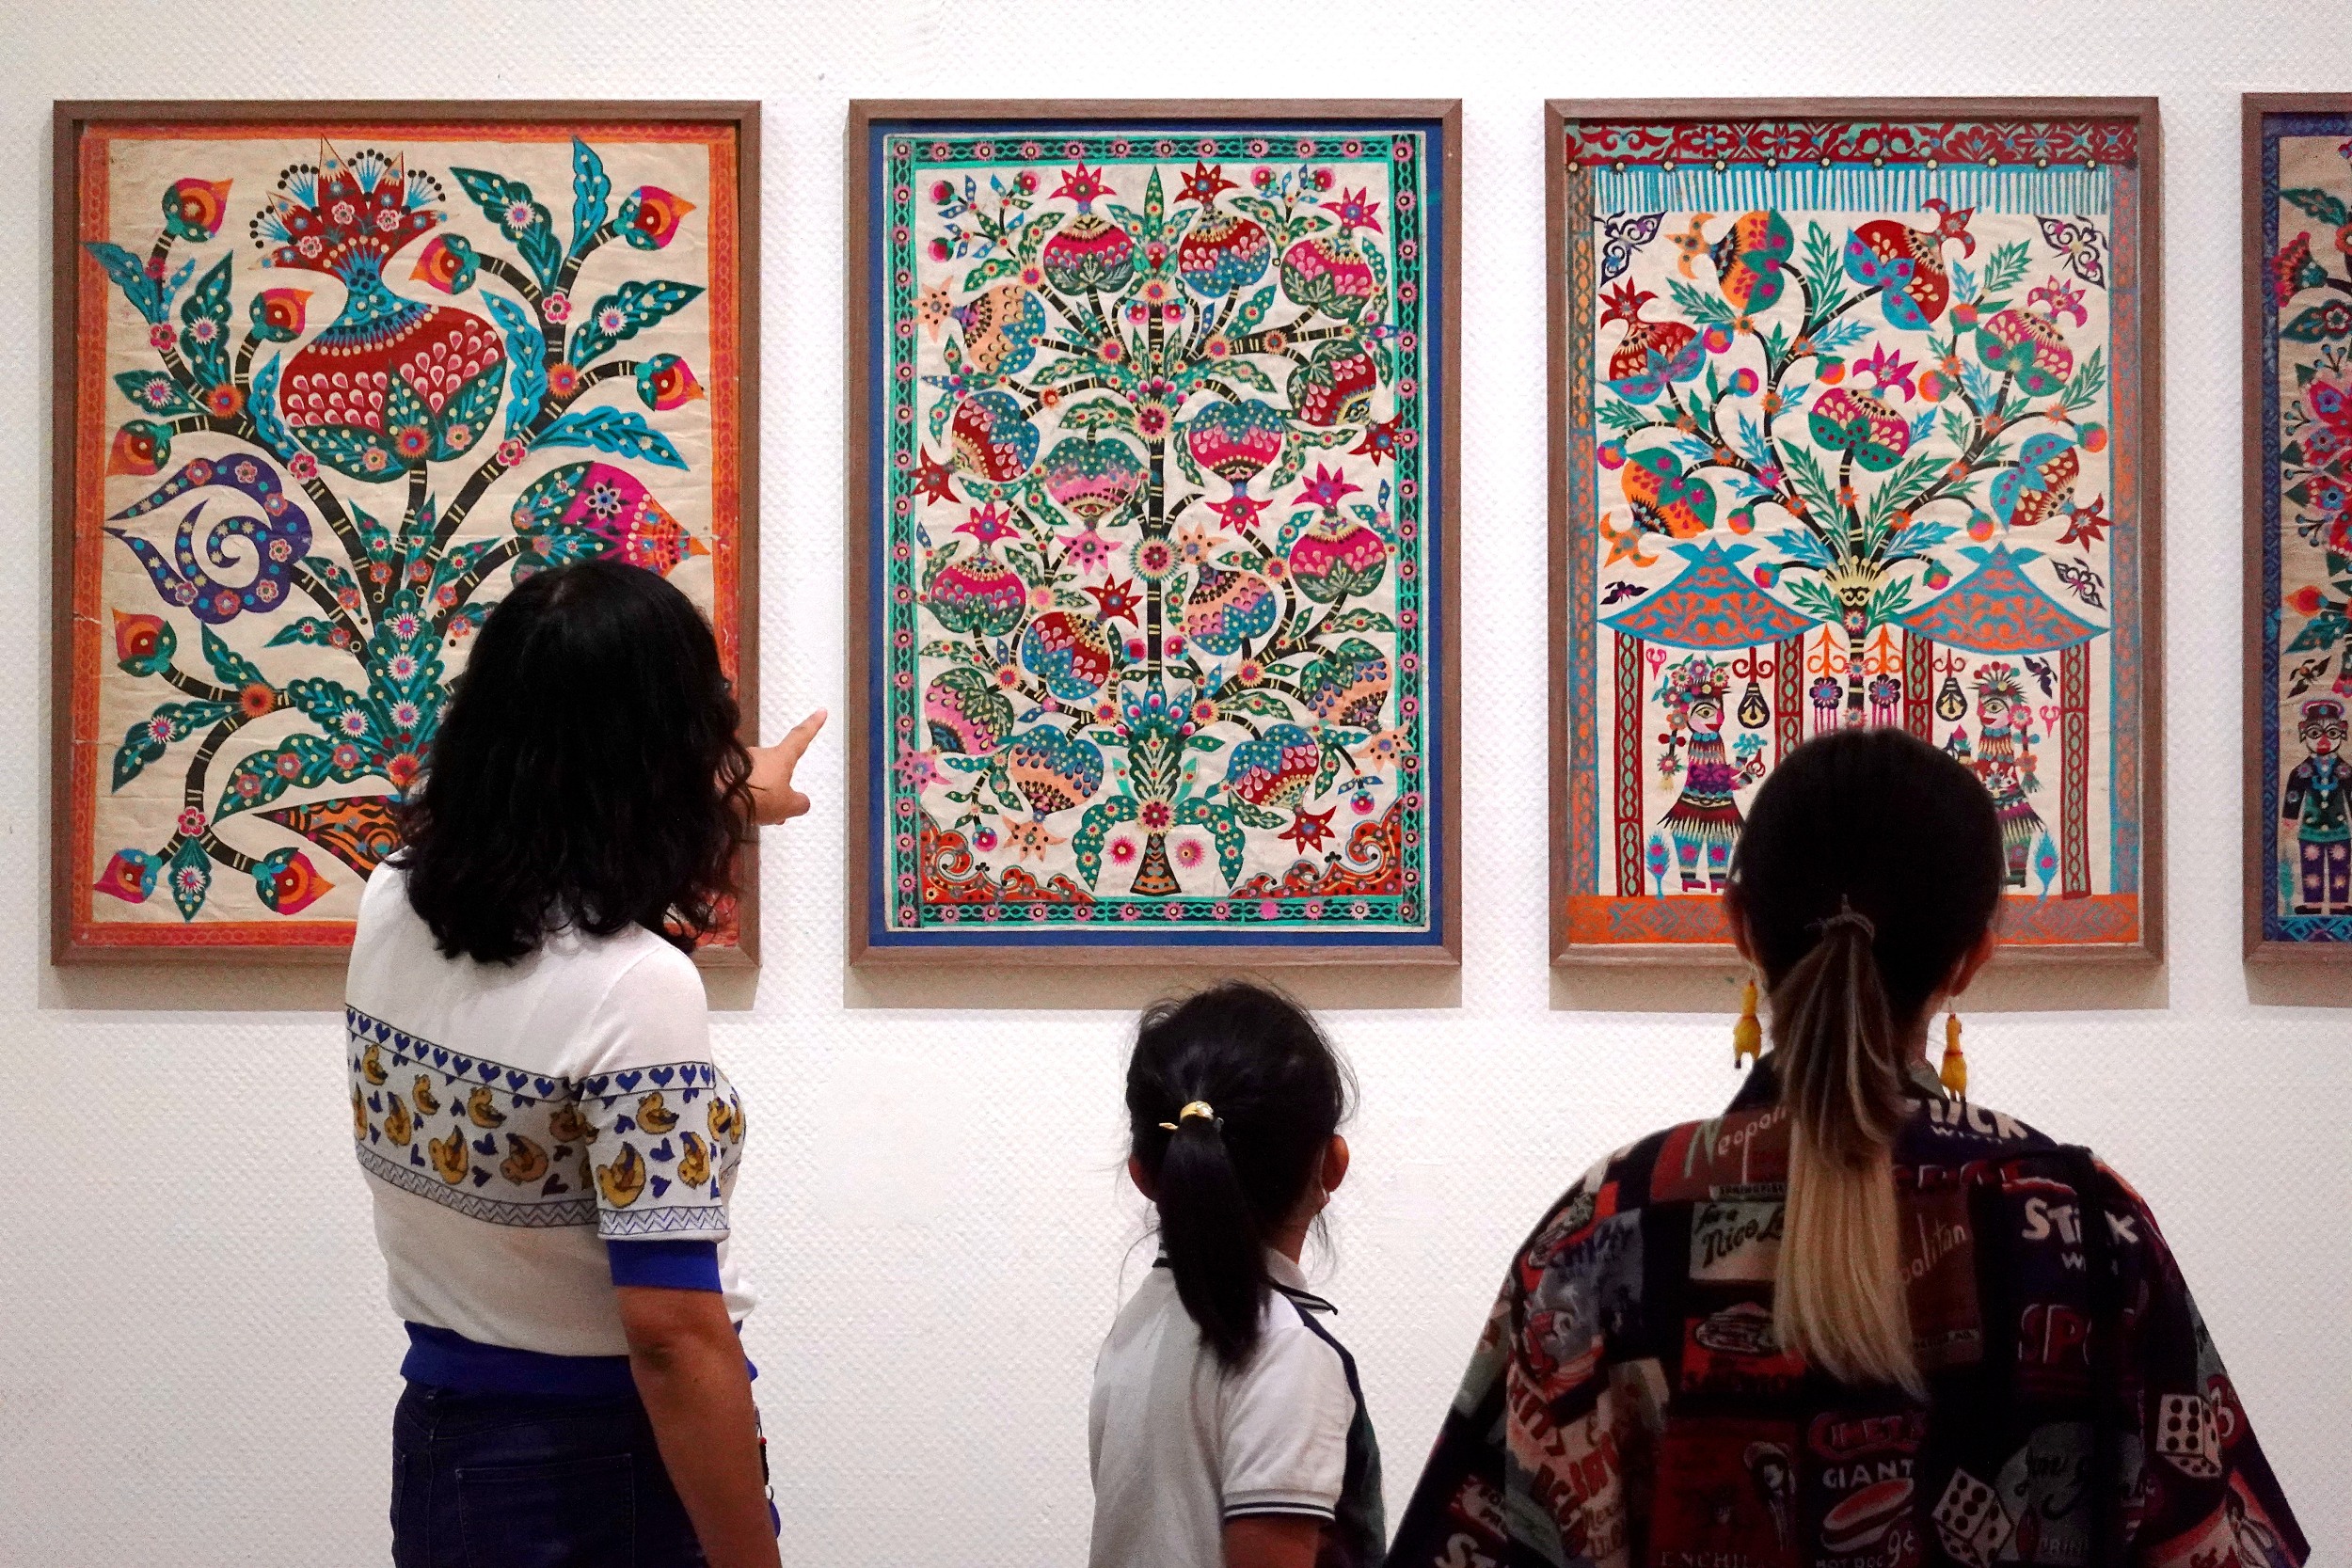 Works by folk master of paper-cutting exhibited in Shaanxi